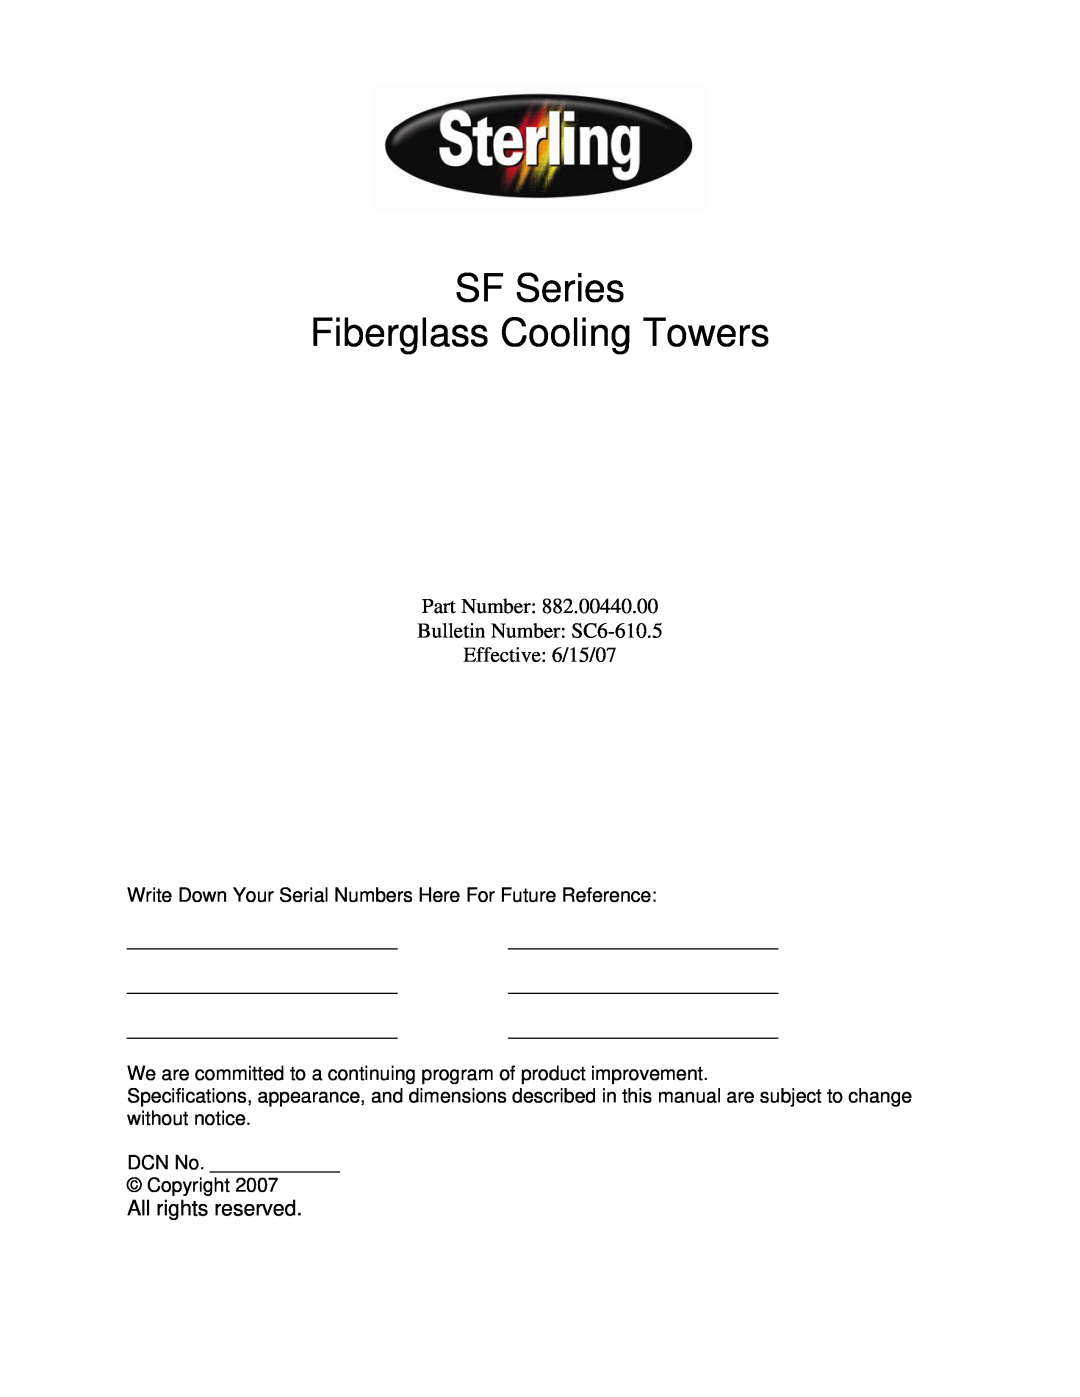 Sterling 882.004400.00 specifications SF Series Fiberglass Cooling Towers, Part Number Bulletin Number SC6-610.5 